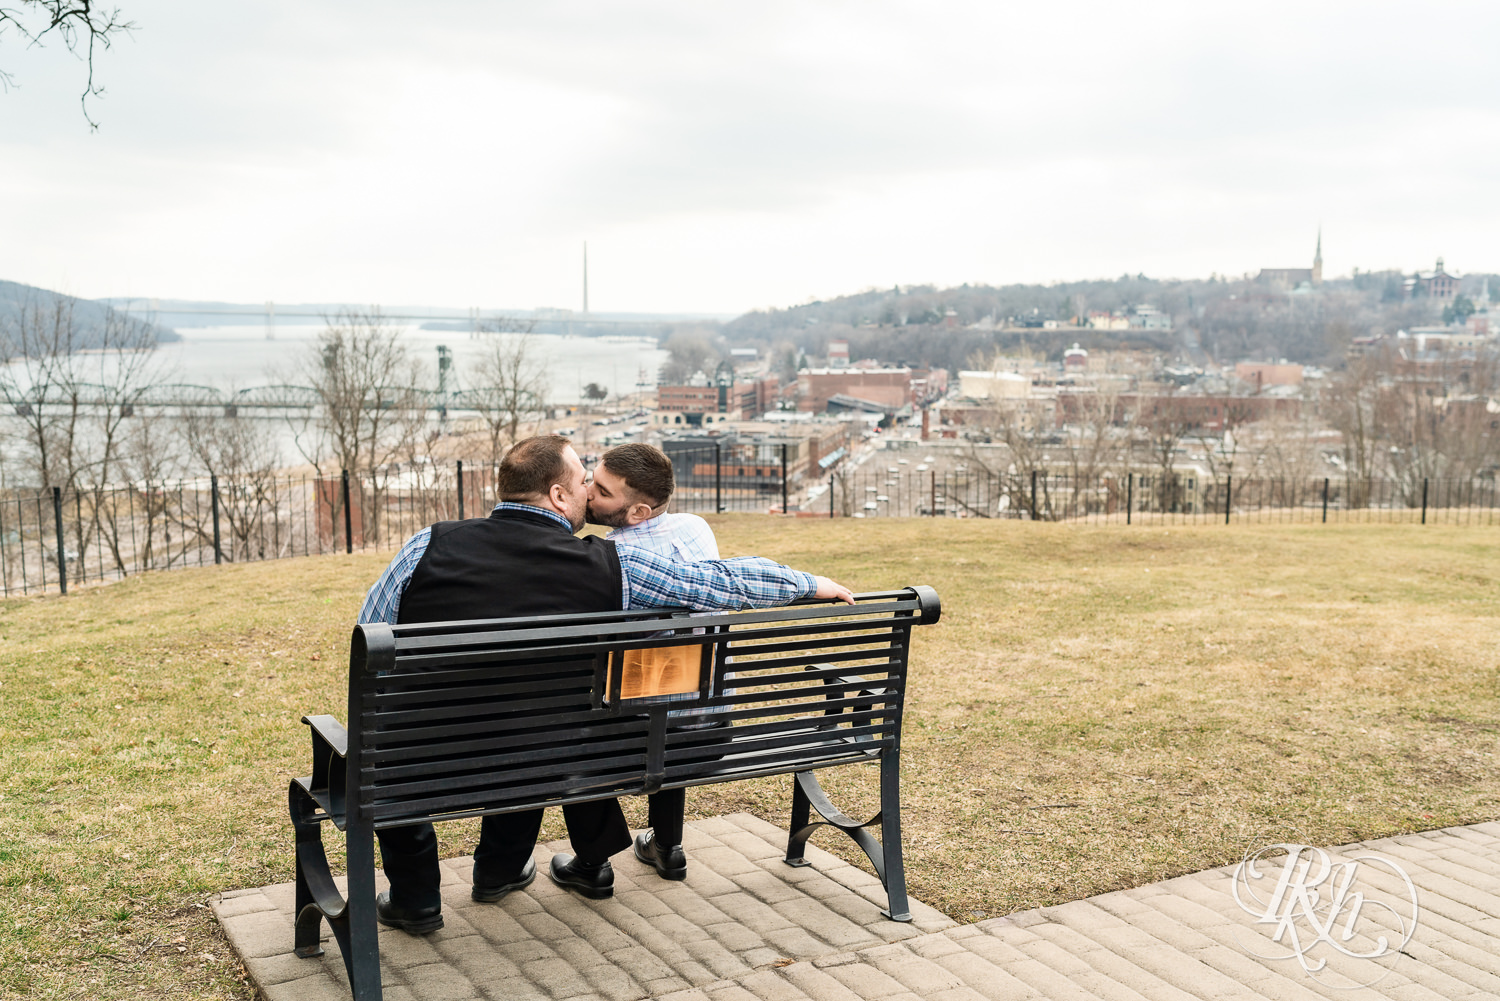 Two men in plaid shirts kiss on bench during engagement photography at Pioneer Park in Stillwater, Minnesota.